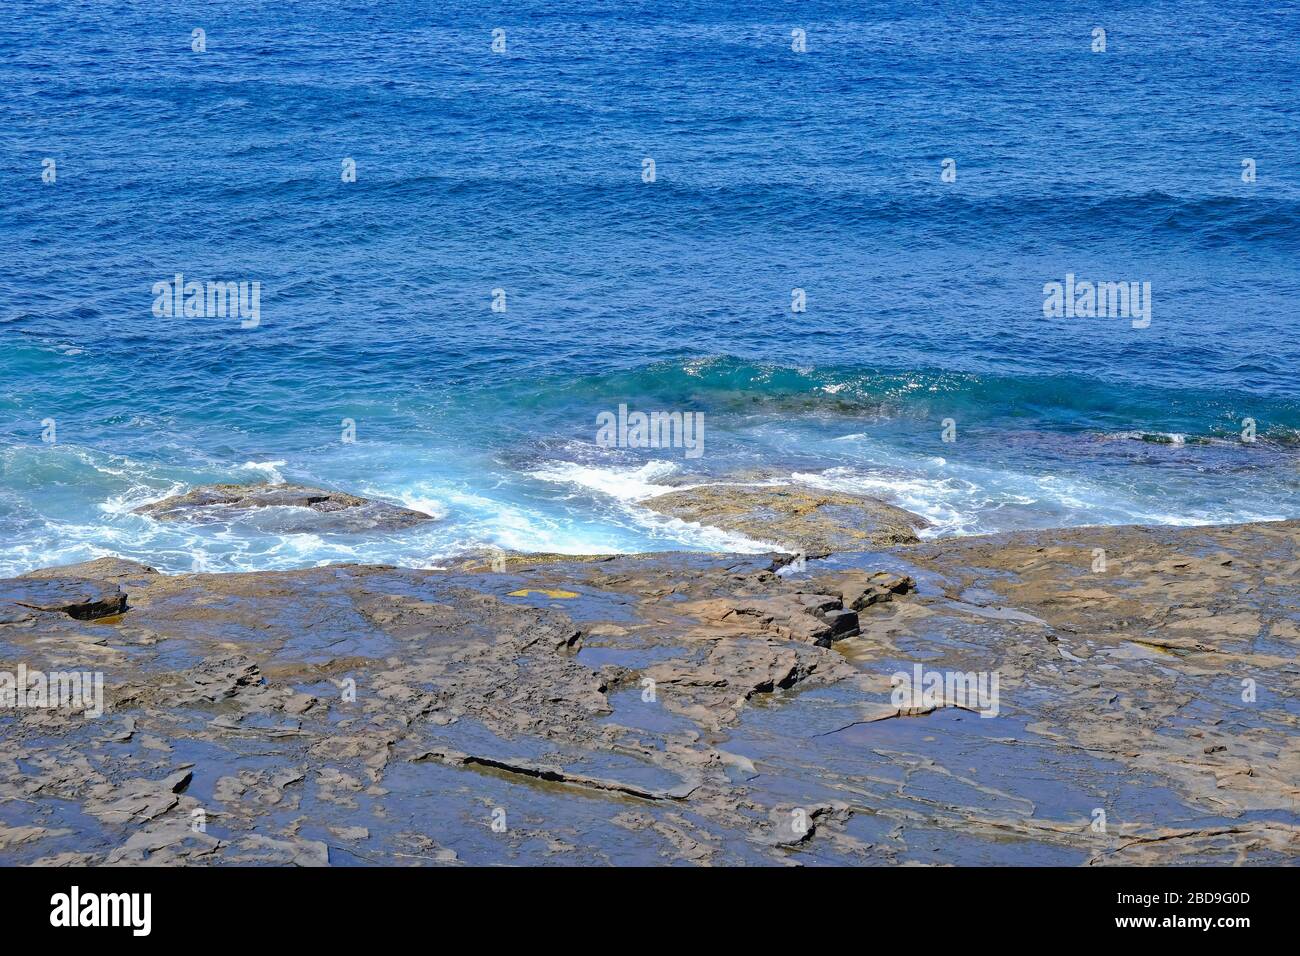 Looking down at a  rock platform, or shelf, and the sea with small waves rolling in. Stock Photo